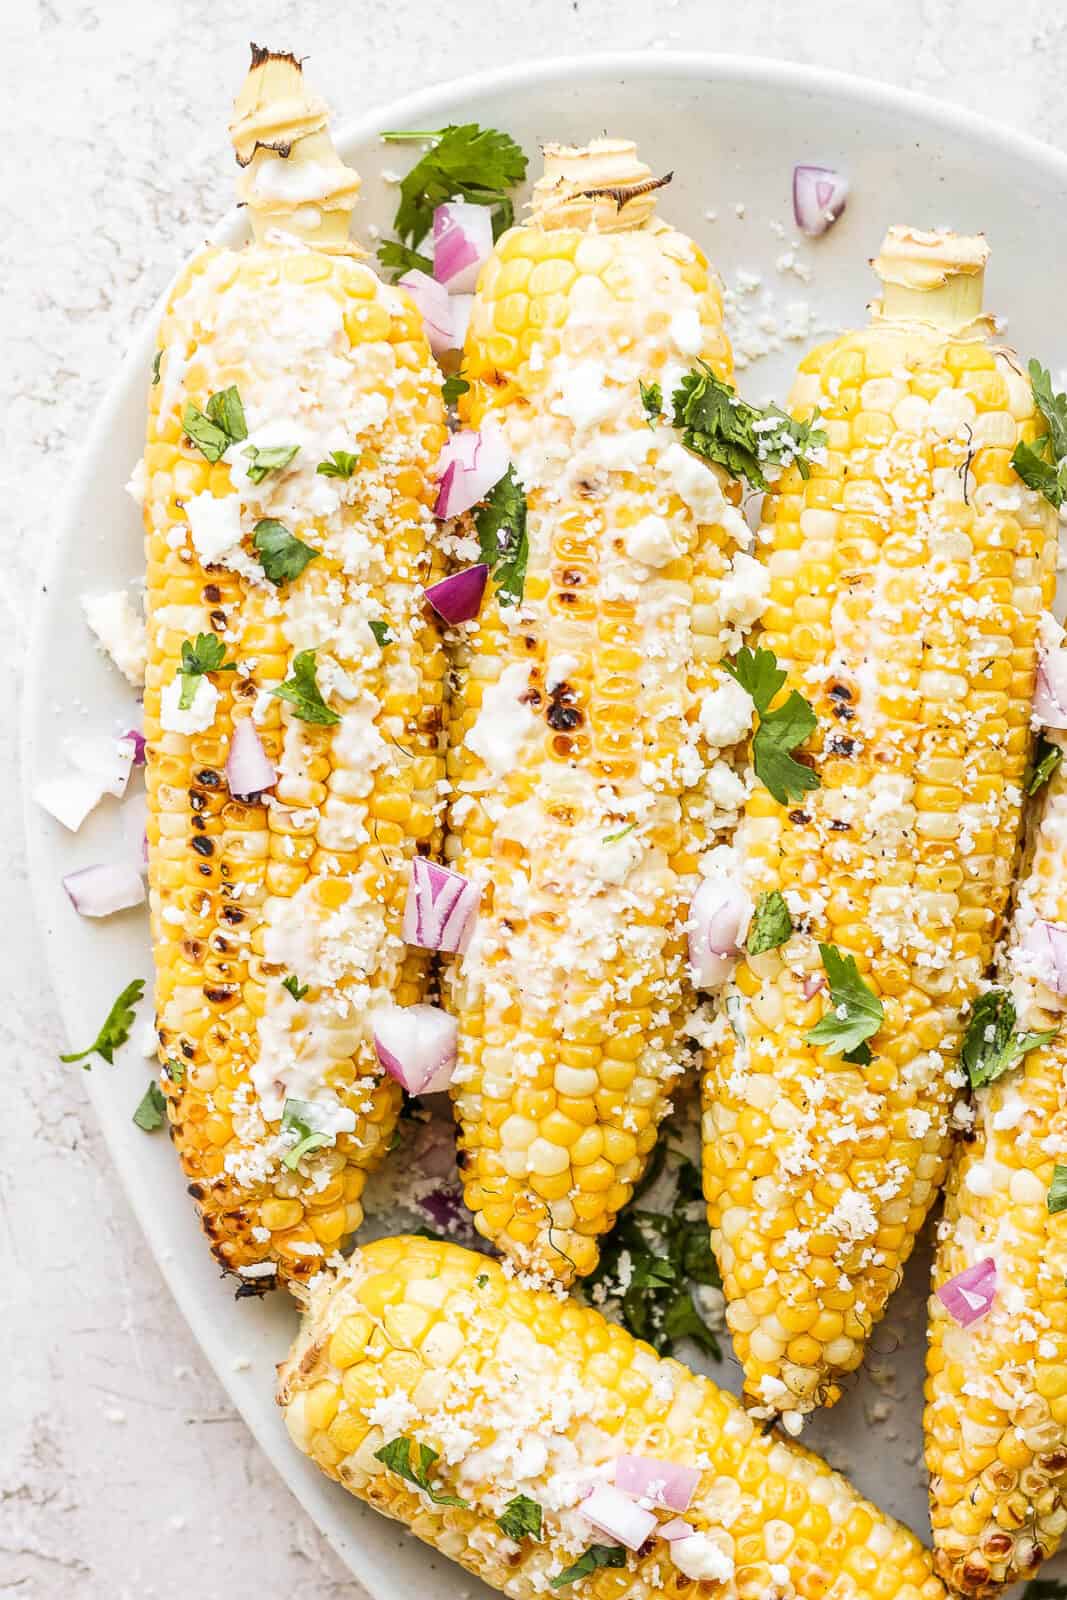 Grilled corn on the cob with mexican street corn topping on top.